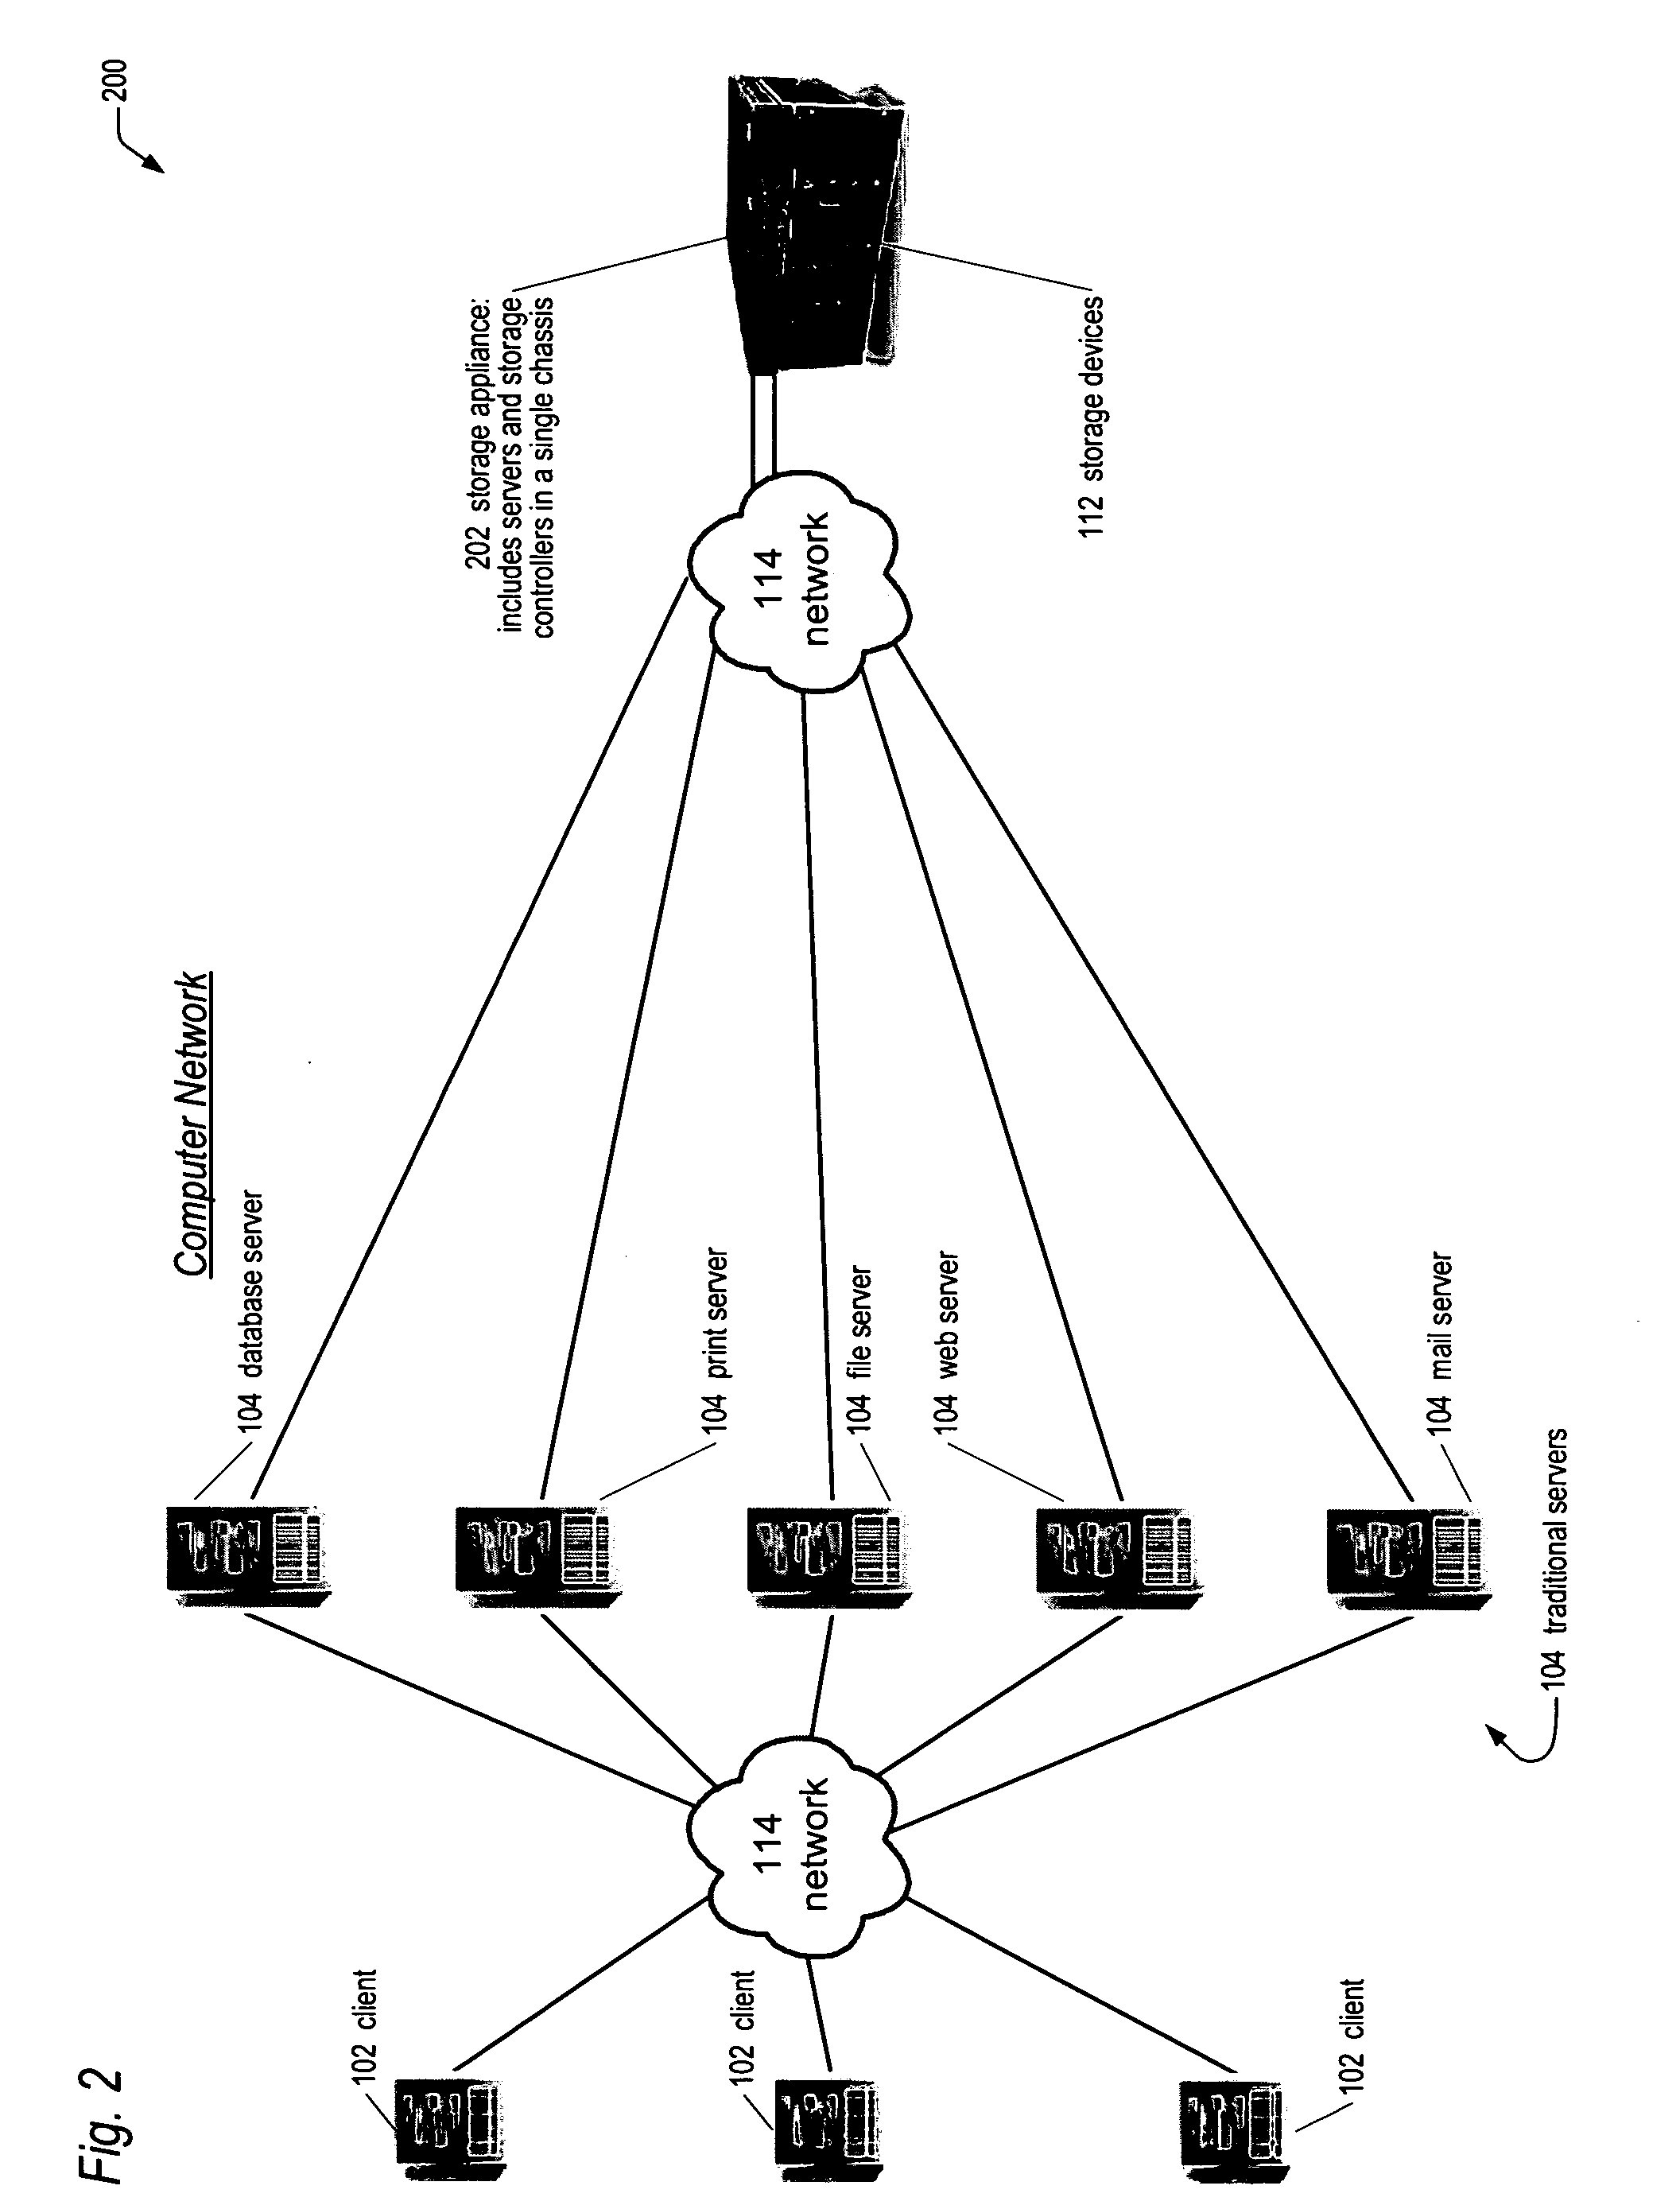 Network storage appliance with integrated server and redundant storage controllers